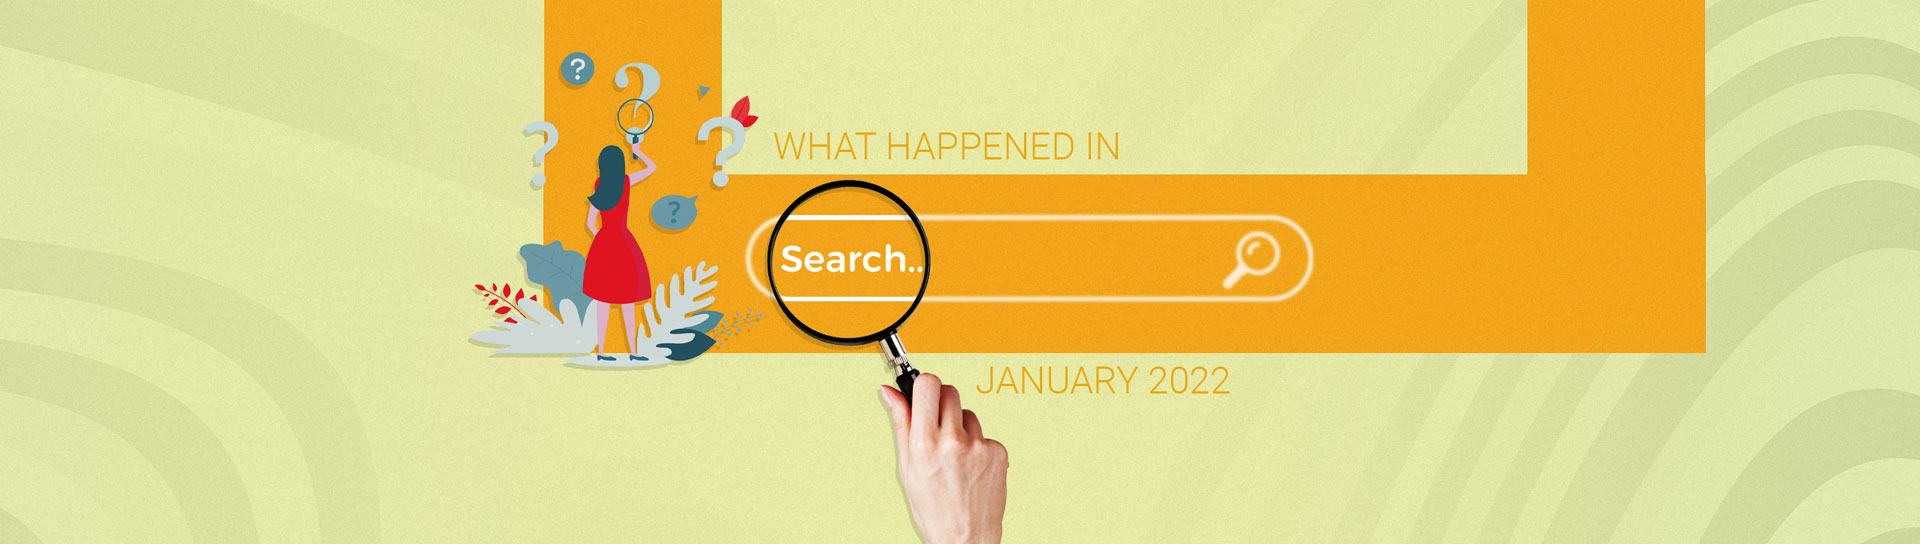 Google Search Updates – January ‘22 Changes